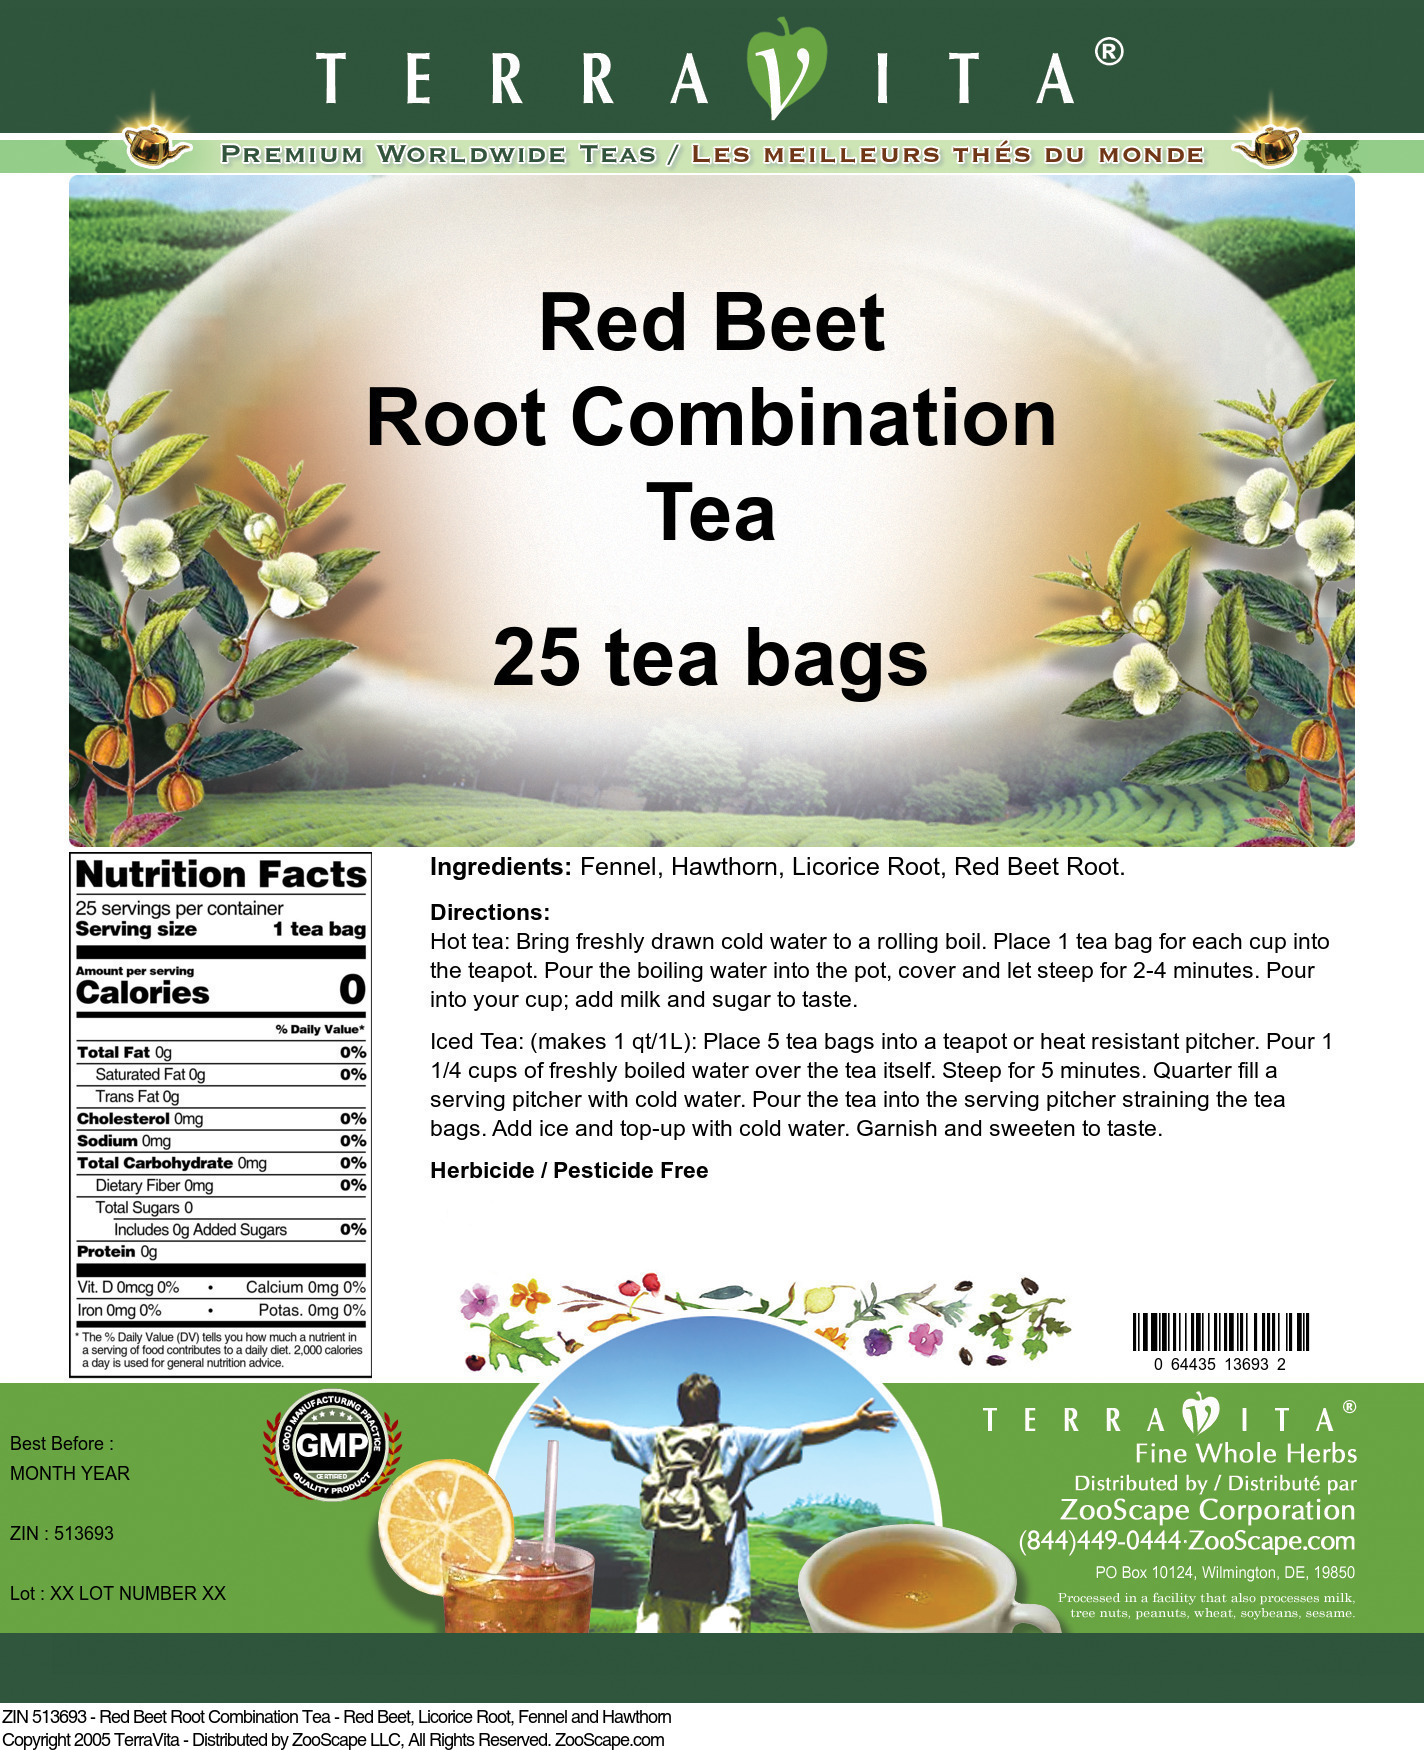 Red Beet Root Combination Tea - Red Beet, Licorice Root, Fennel and Hawthorn - Label